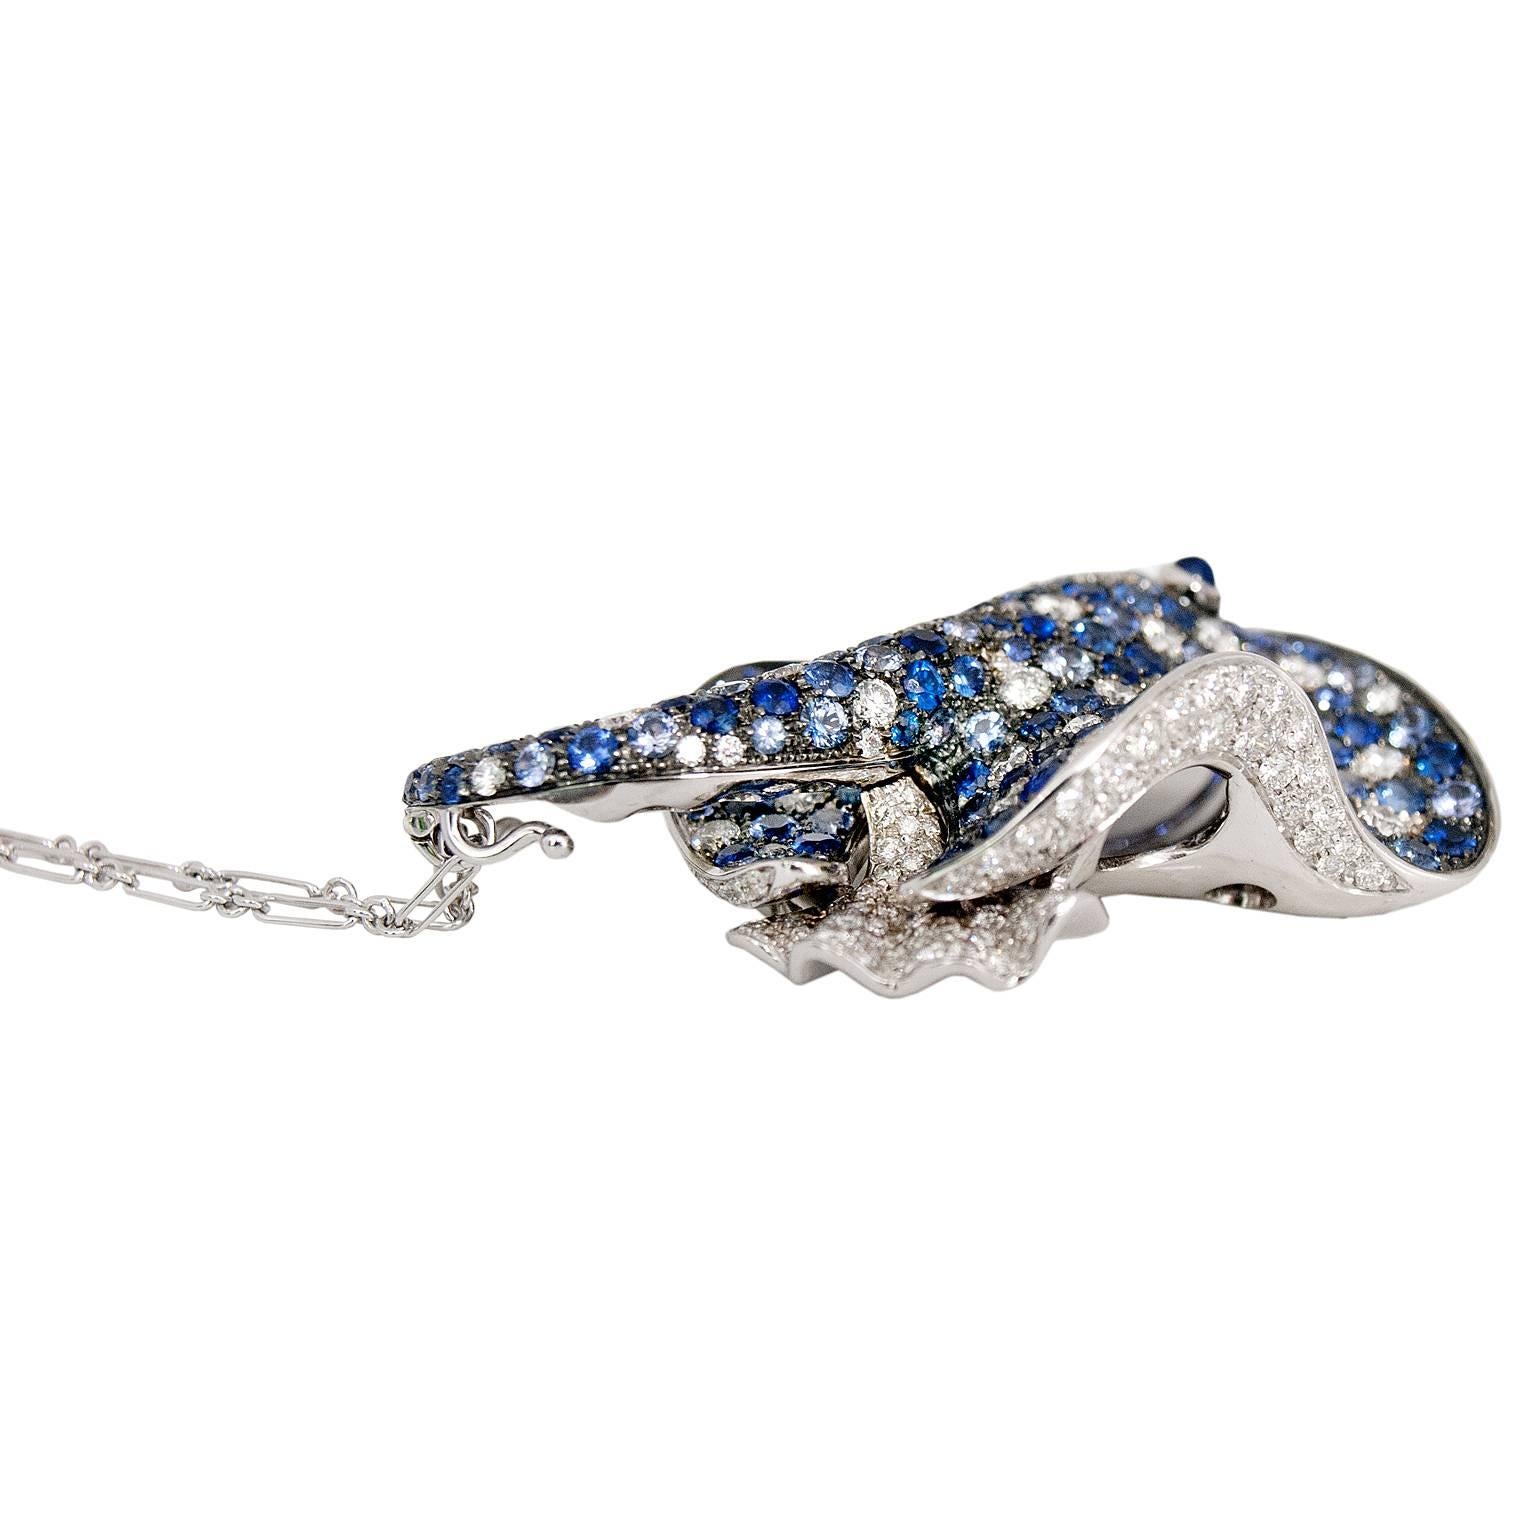 Contemporary Jewelry Ray Fish White Diamond Blue Sapphire 18kt Gold Brooch Pendant / Necklace For Sale